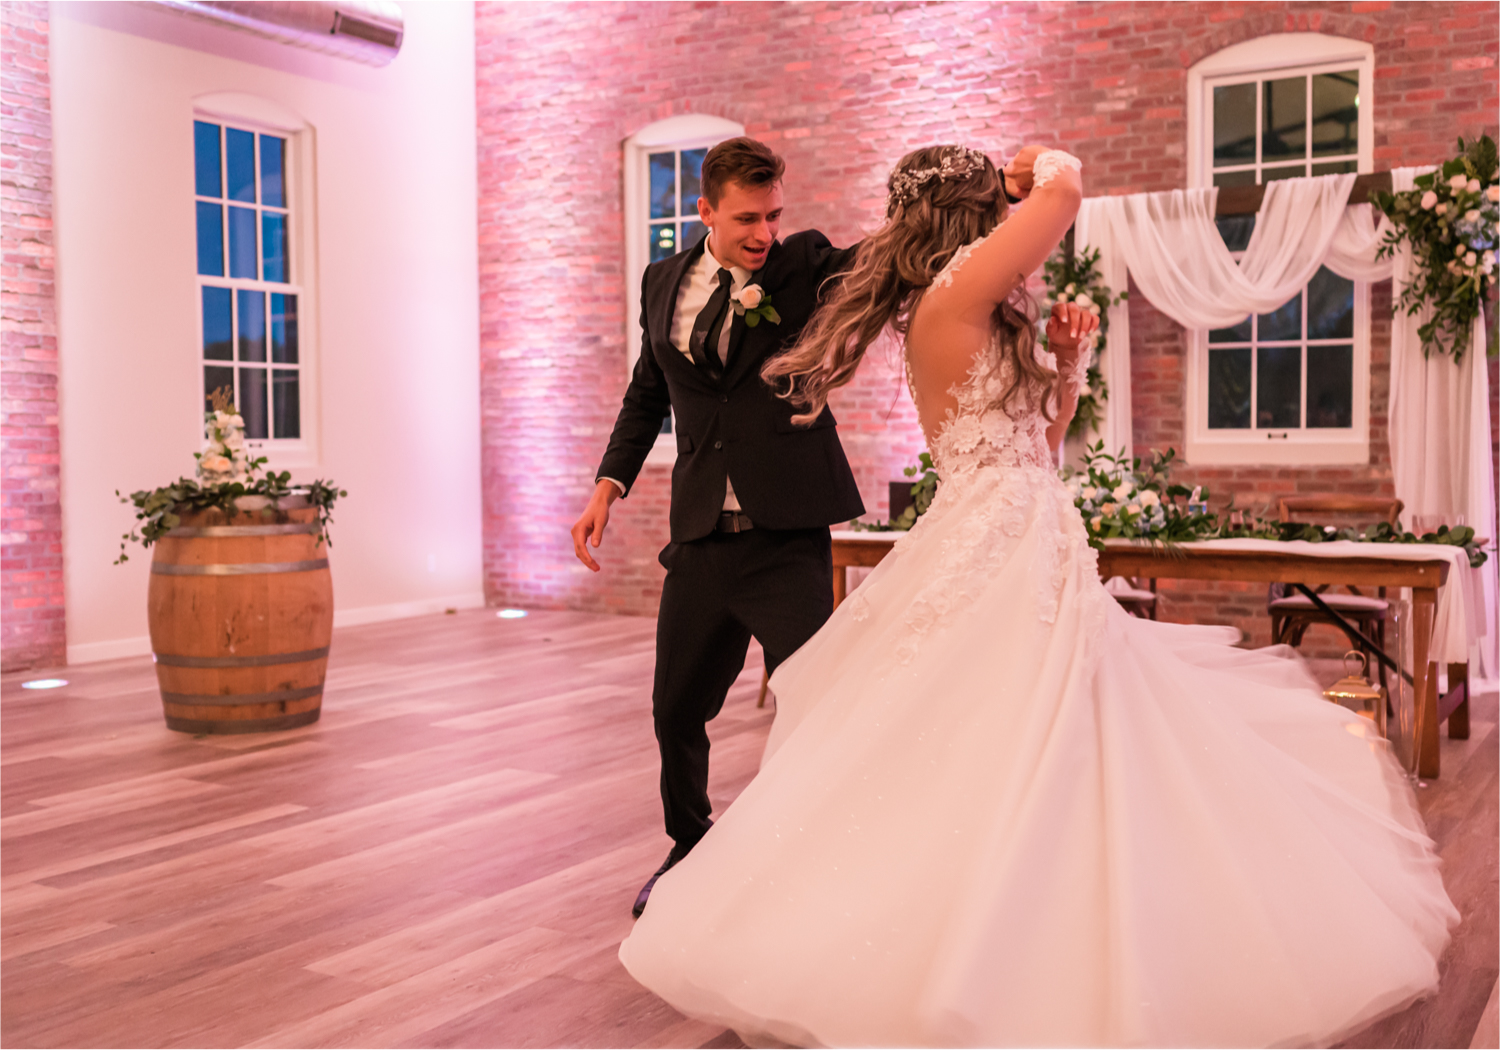 Romantic and Rustic Wedding at The Mill in Windsor | Britni Girard Photography | Colorado based wedding photography and videography team | Choreographed First Dance to Speechless by Dan and Shay